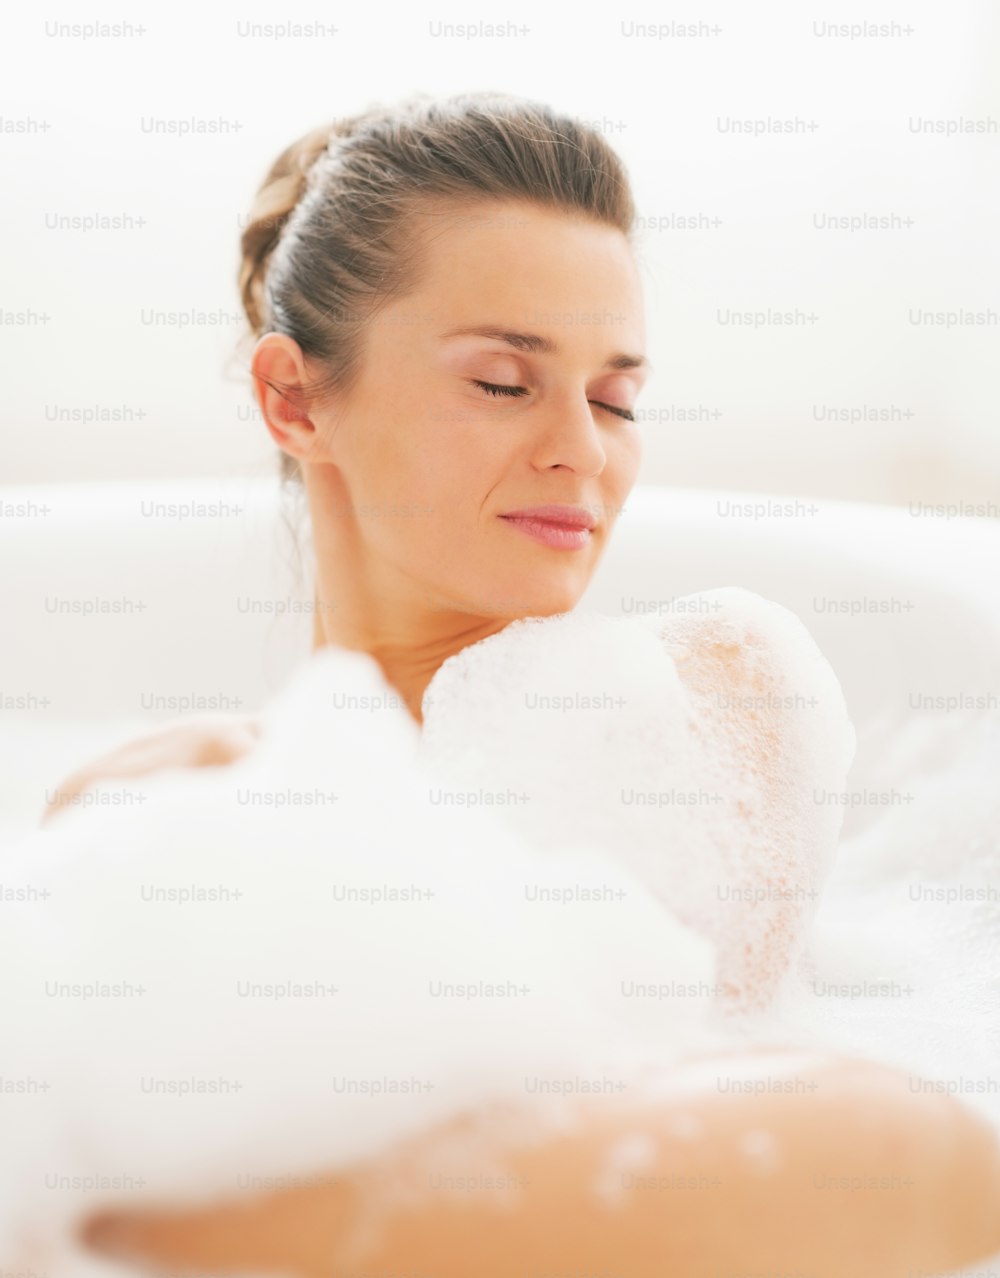 Portrait of young woman laying in bathtub